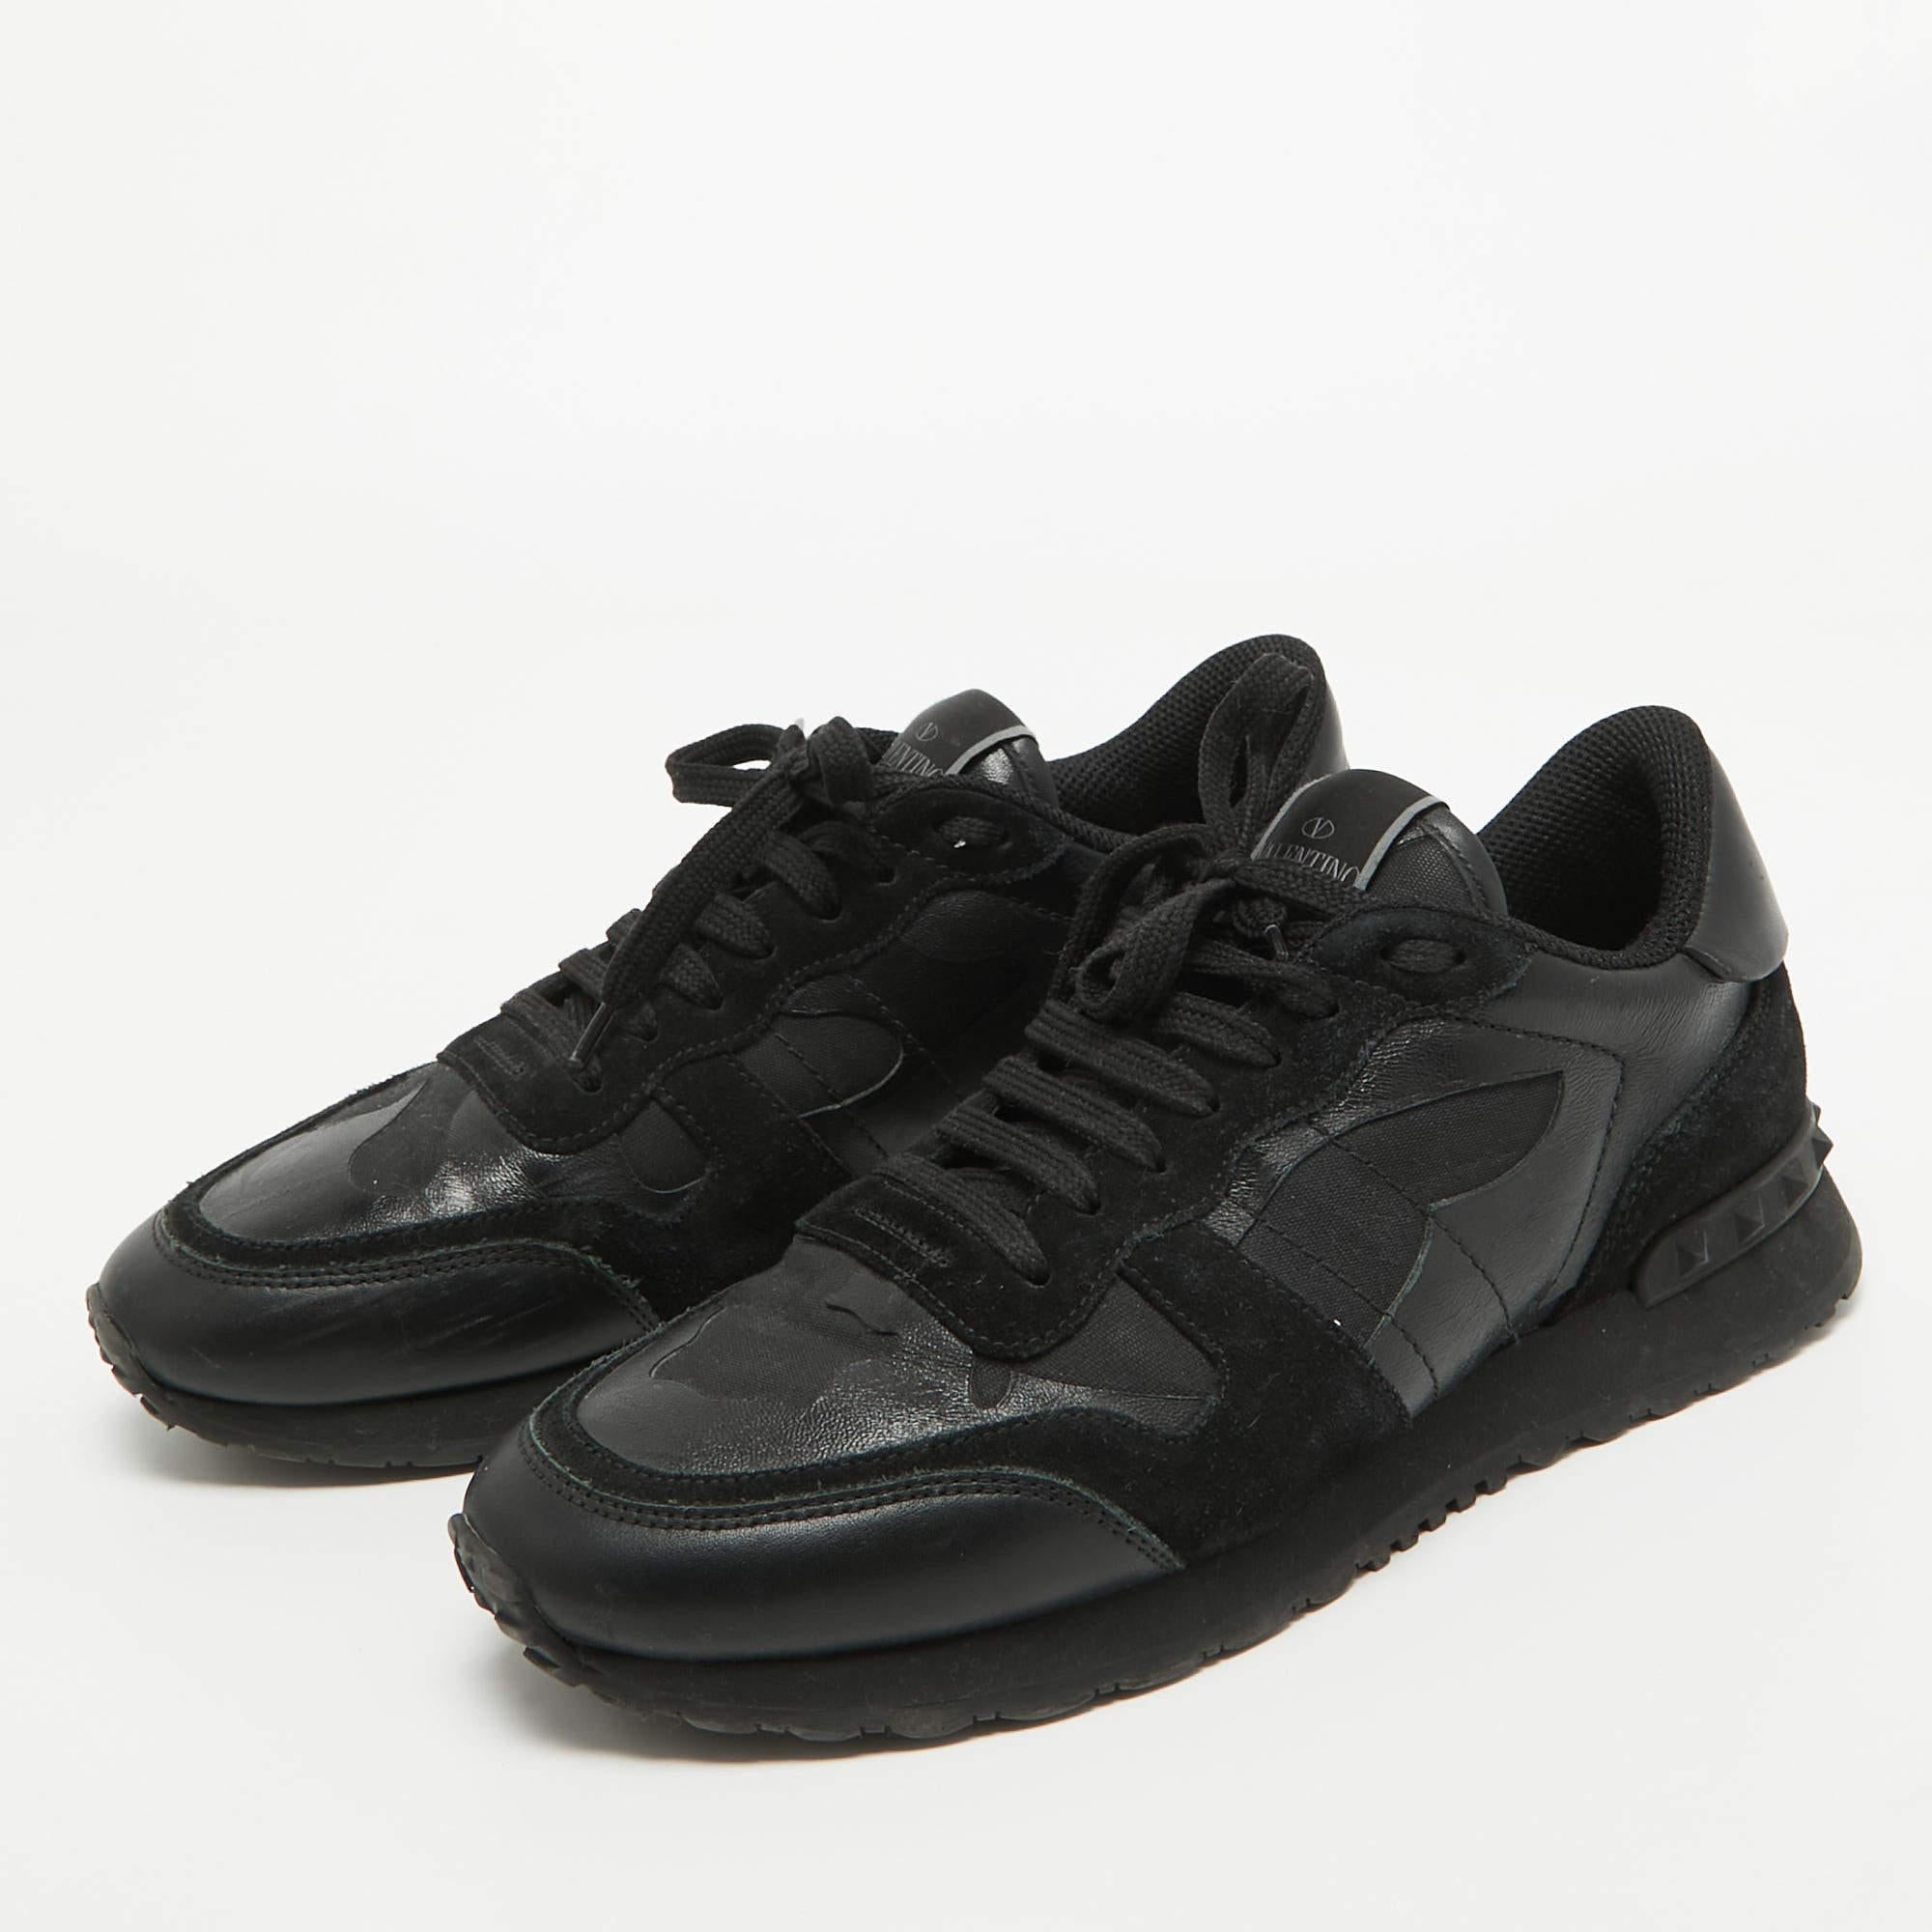 Valentino Black Leather and Suede Rockrunner Law Top Sneakers Size 40 3